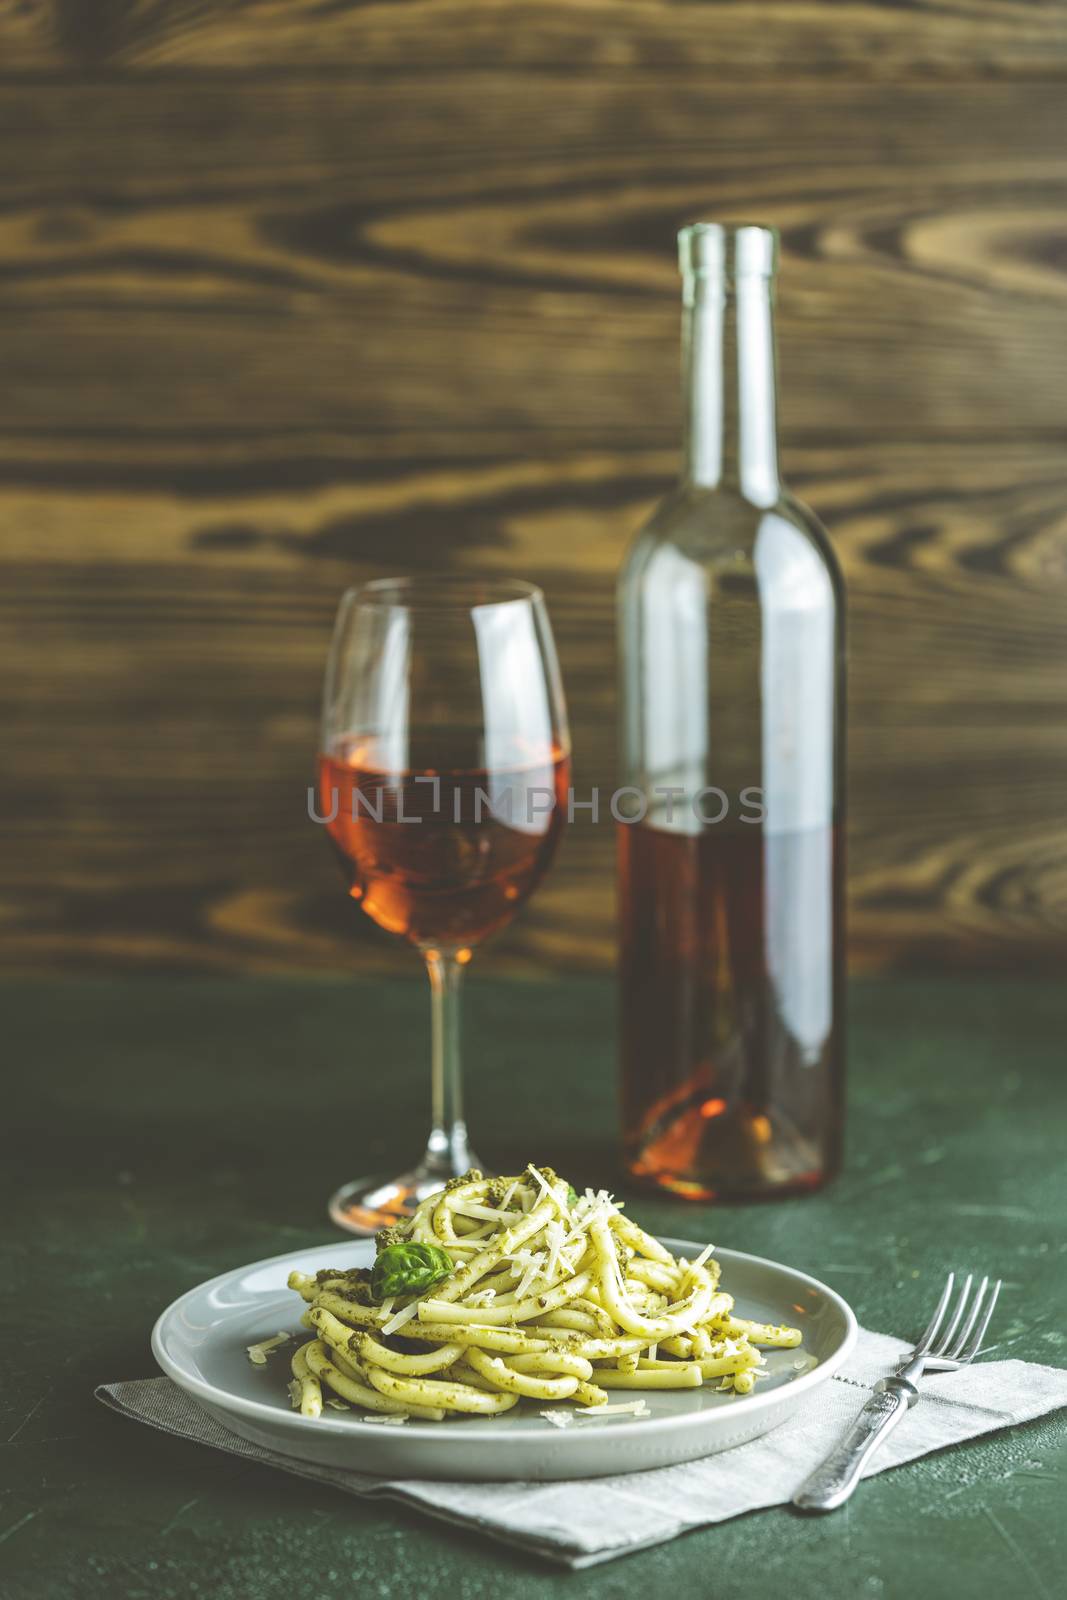 Spaghetti pasta bucatini with pesto sauce and parmesan. Italian traditional perciatelli pasta by genovese pesto sauce in gray dish served with wine	